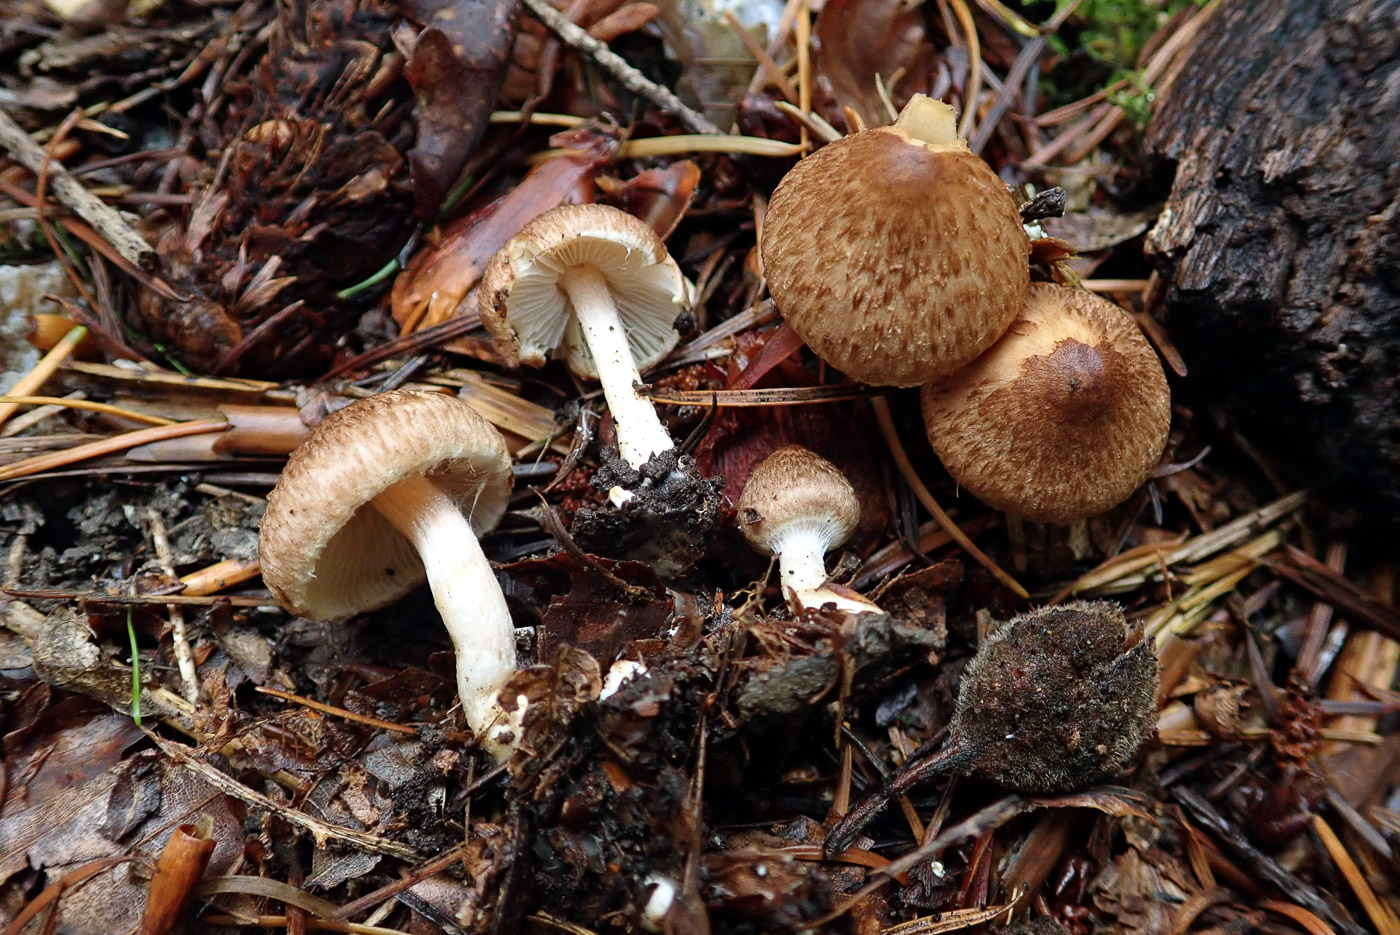 Inocybe flocculosa by Penny Cullington